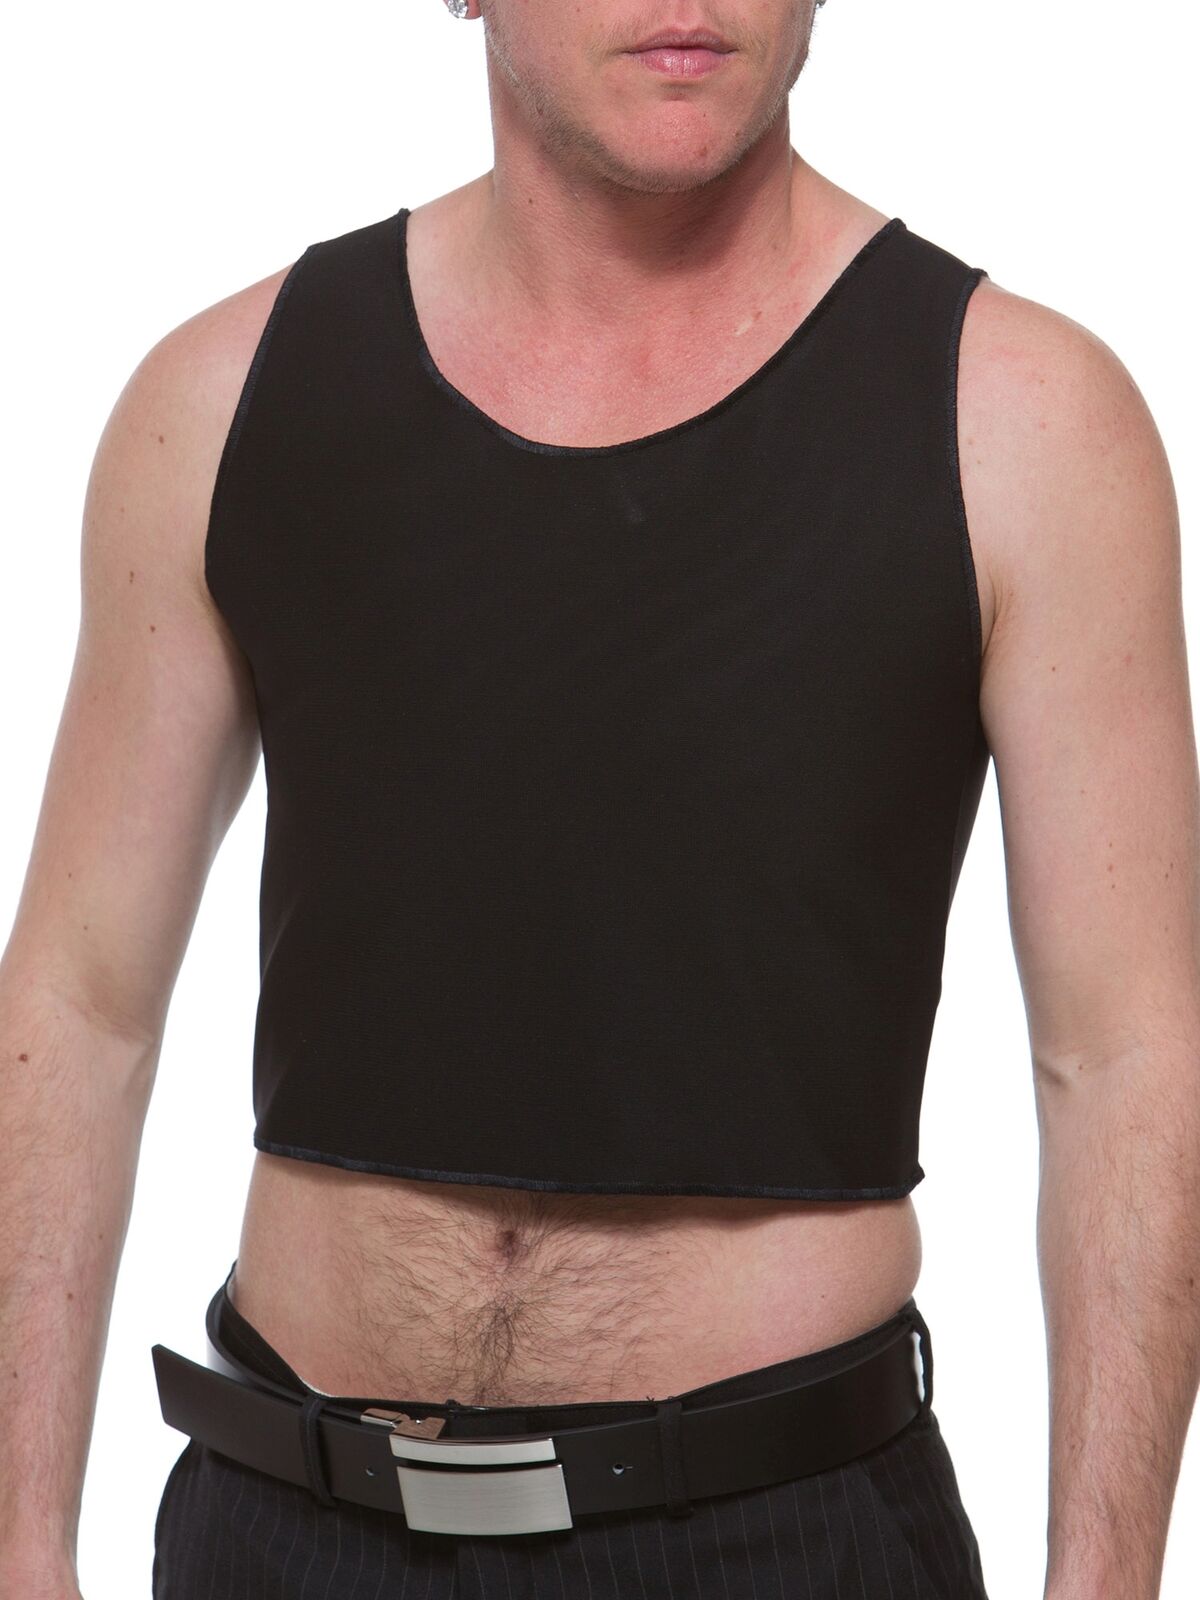 A Complete Guide to Chest Binding for Trans Men - FTM Guide